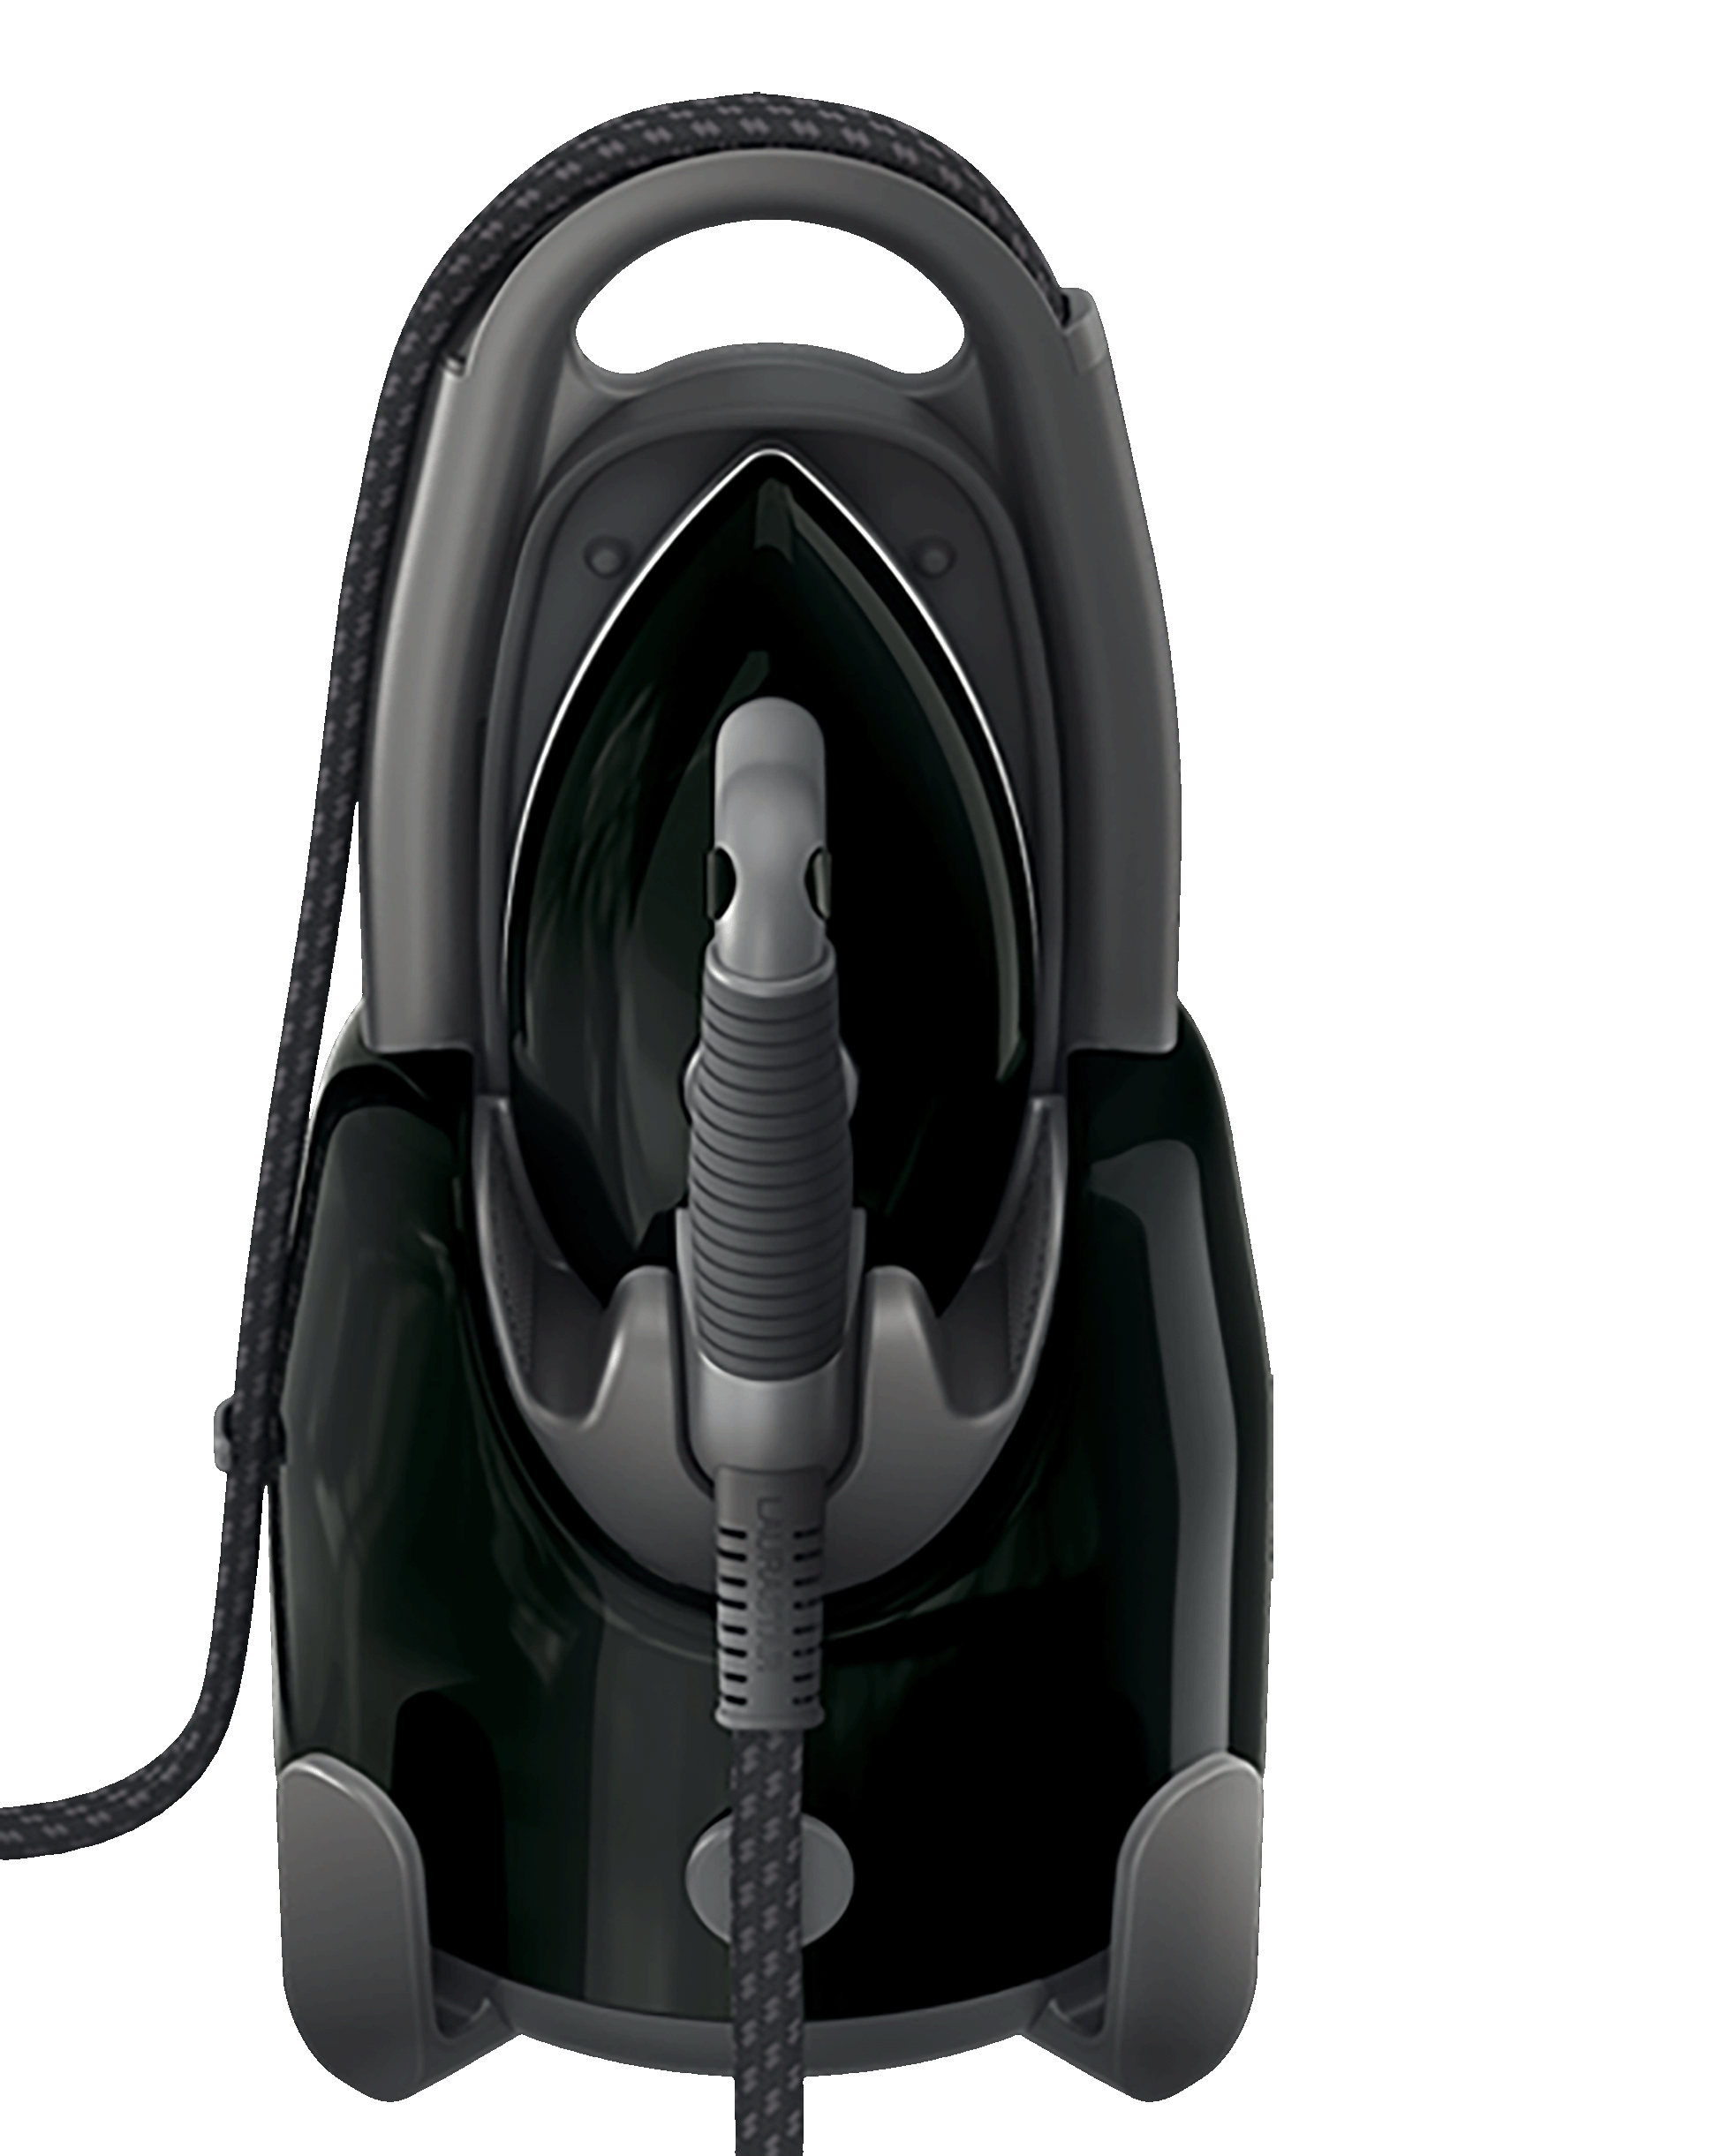 LAURASTAR The Lift Plus Irons in Iron Black Automatic the at Ultimate department (1450-Watt) Shut-off